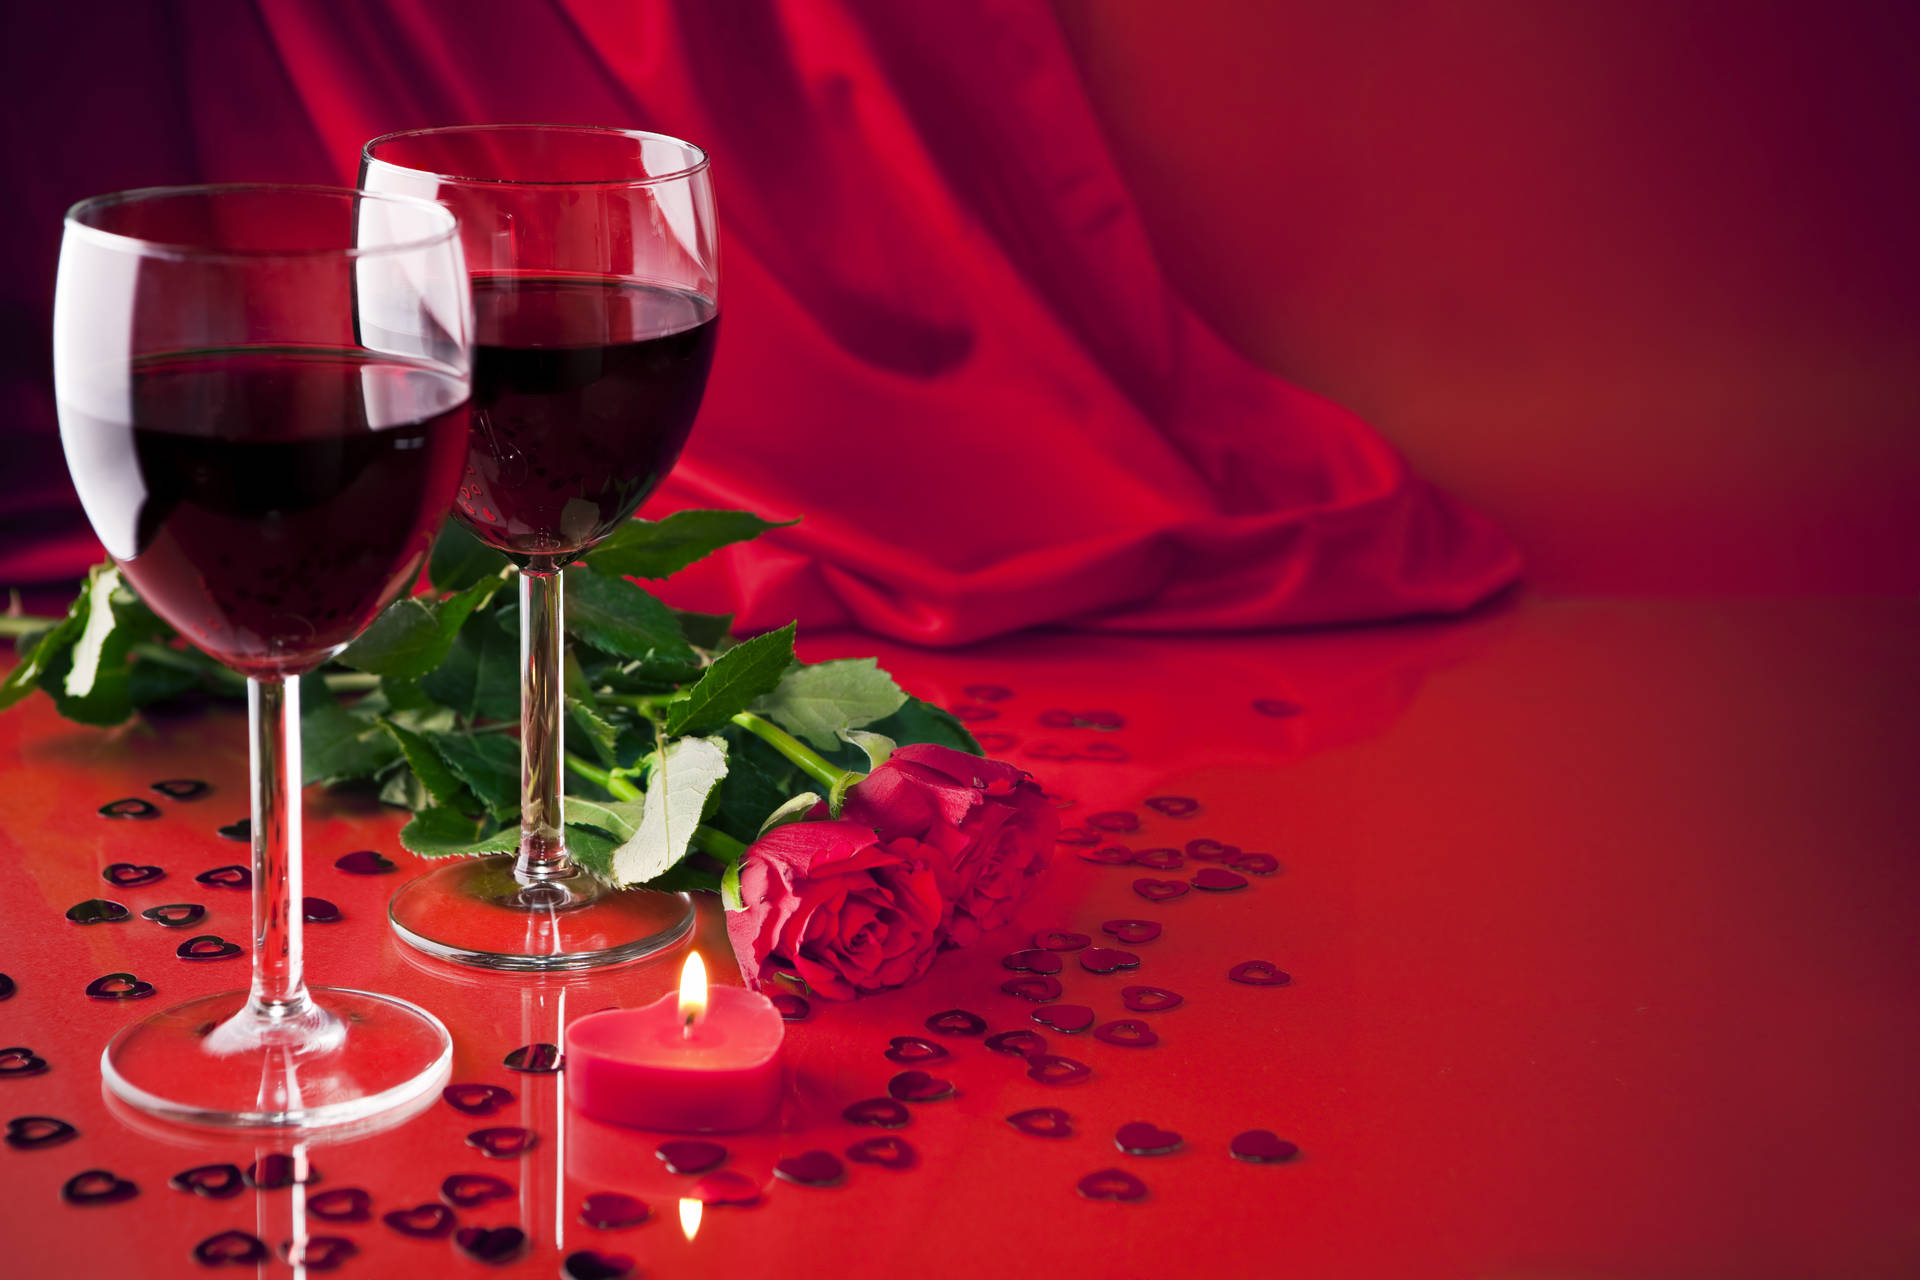 Free Wine Wallpaper Downloads, [200+] Wine Wallpapers for FREE | Wallpapers .com